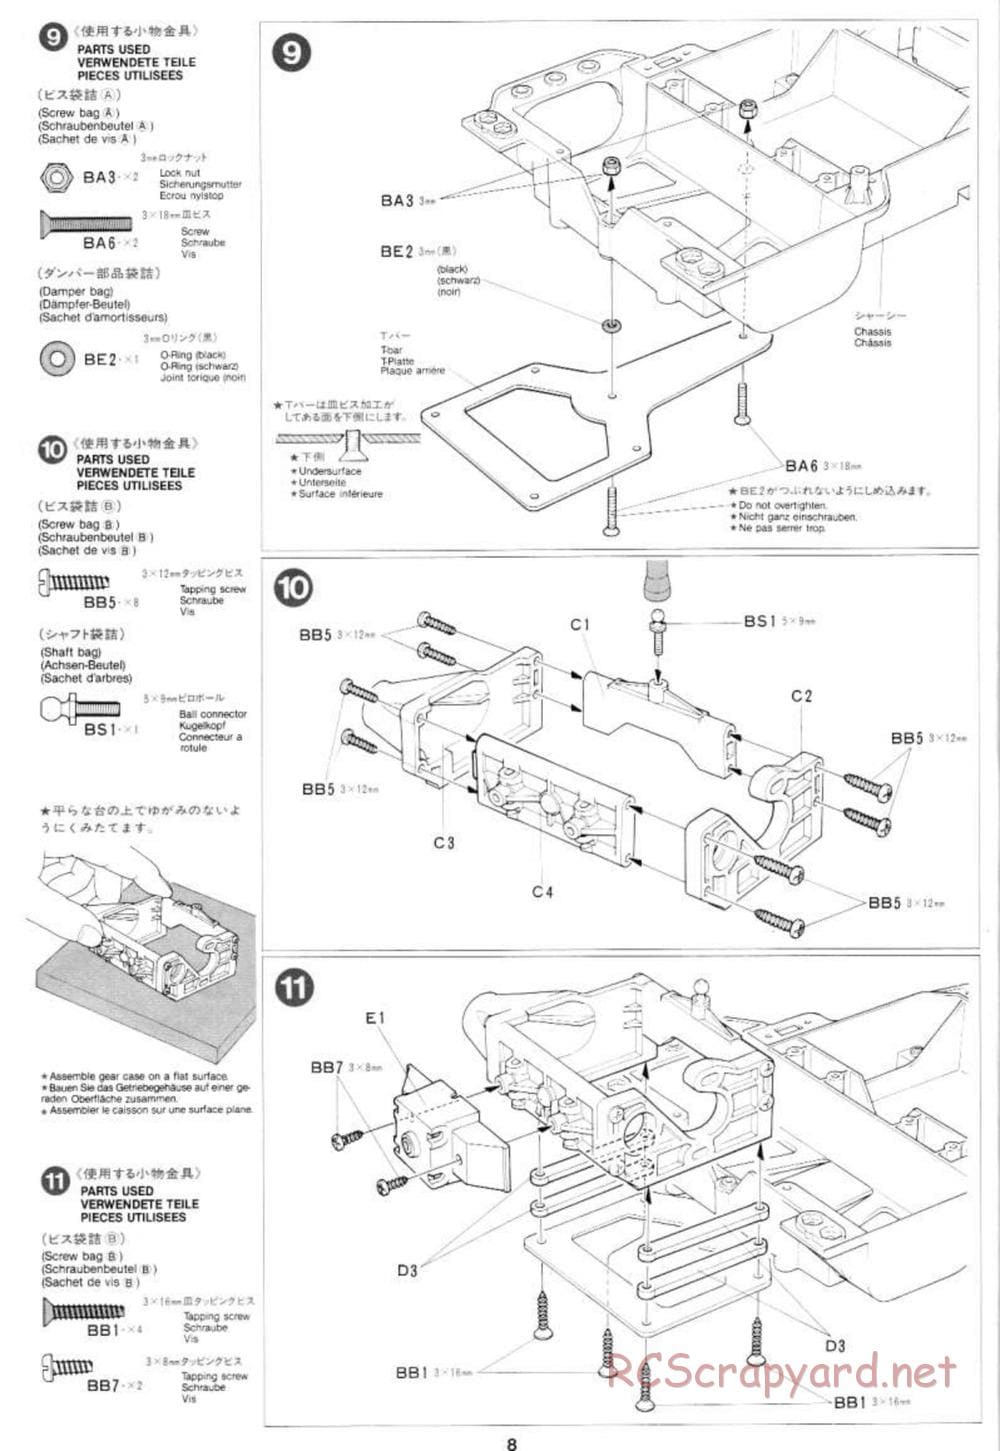 Tamiya - Mercedes-Benz C11 - Group-C Chassis - Manual - Page 8